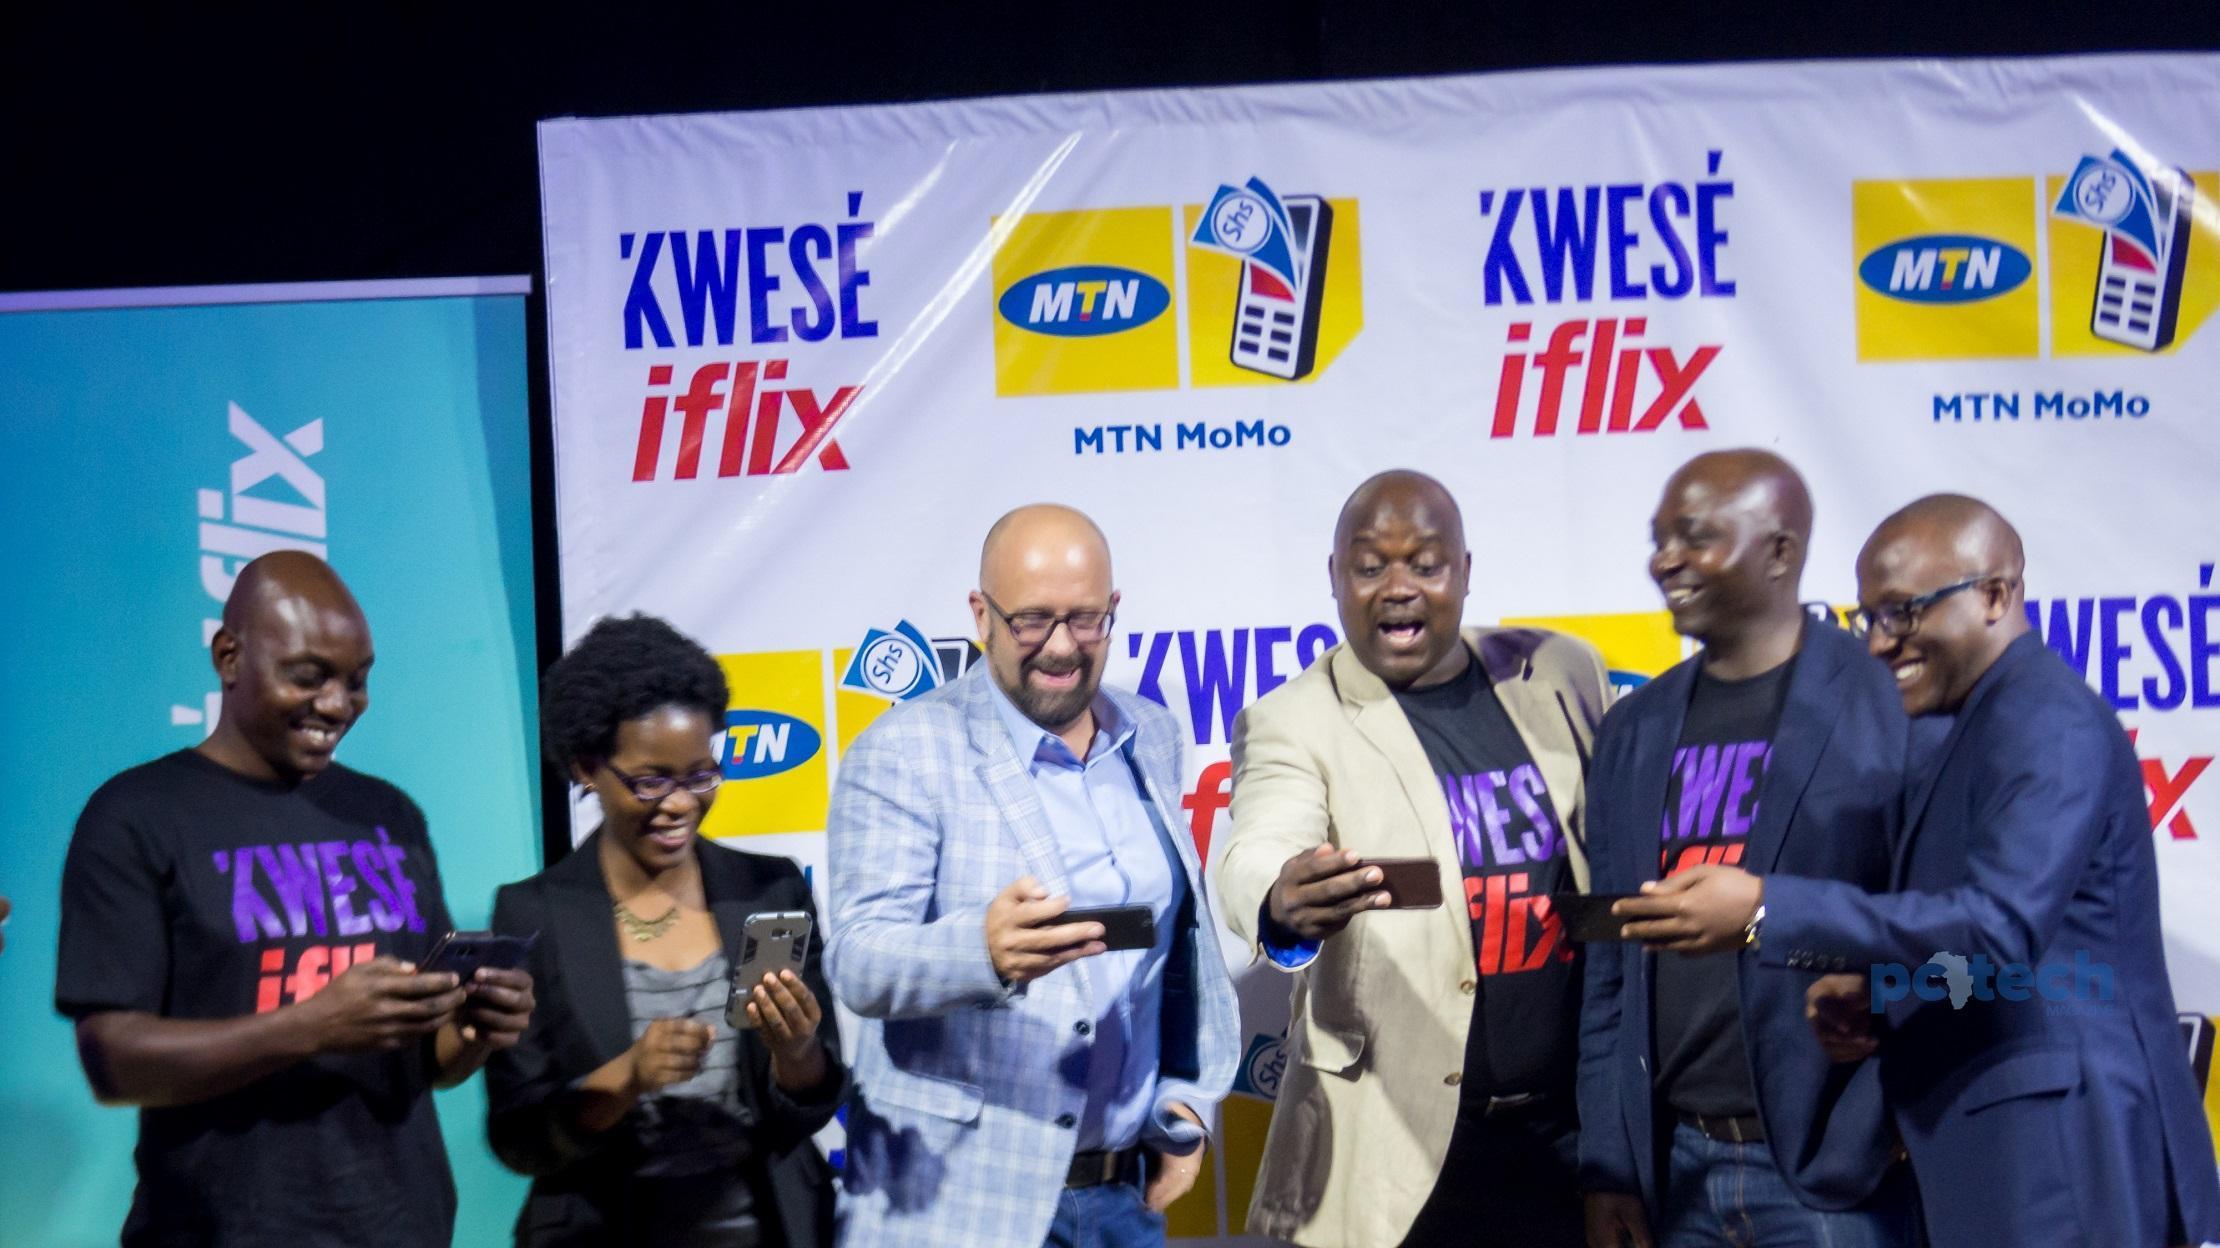 Susan Kayemba, Senior Manager Digital at MTN Uganda (Left), and MTN Uganda's Chief Marketing Officer; Olivier Prentout (2nd from Left) pose for a group photo with the Kwese Iflix team as they were trying out the Iflix app. This was at the launch of Kwese Iflix Platform in Uganda on Tuesday 12th, June 2018 at The Square Palace in Kampala, Uganda.